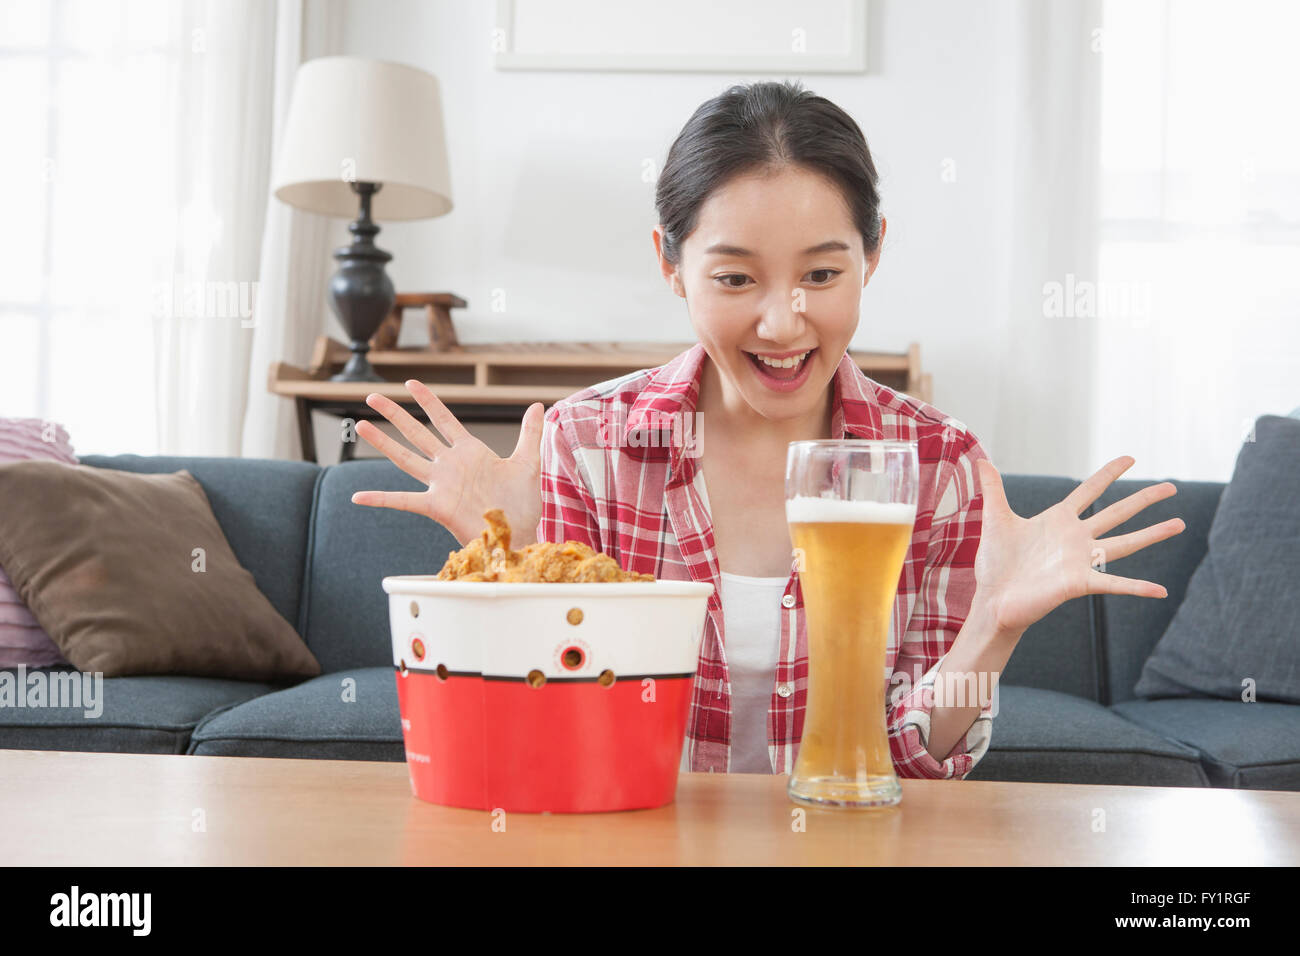 Portrait of young smiling woman delighted with fried chicken and beer Stock Photo